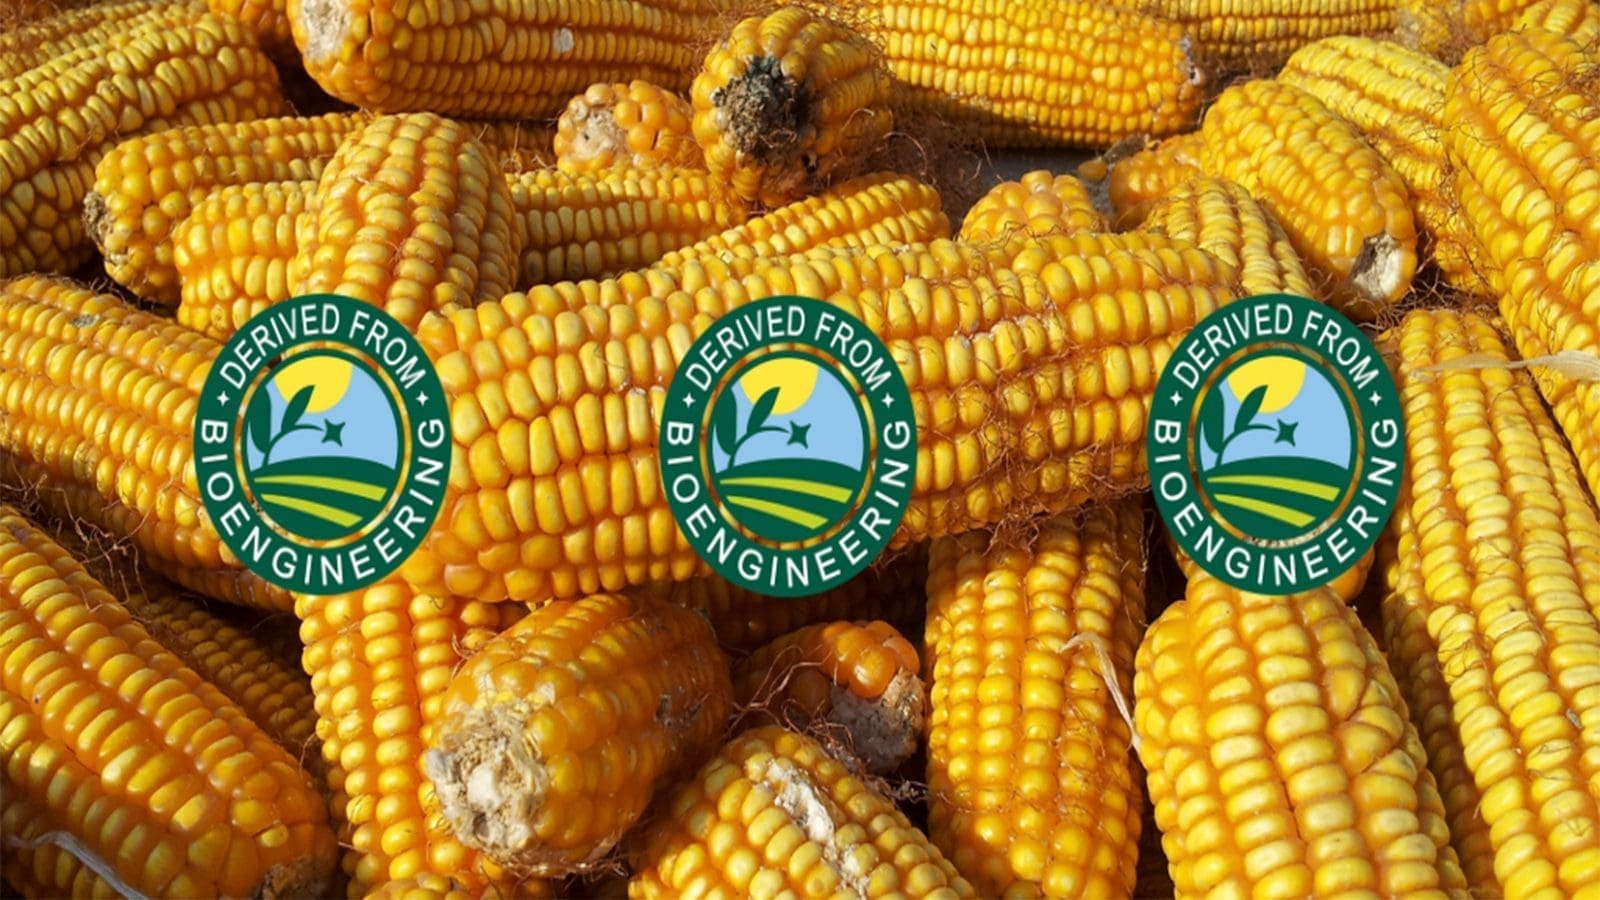 National Biosafety Authority pledges to oversee mandatory labeling of GMO products